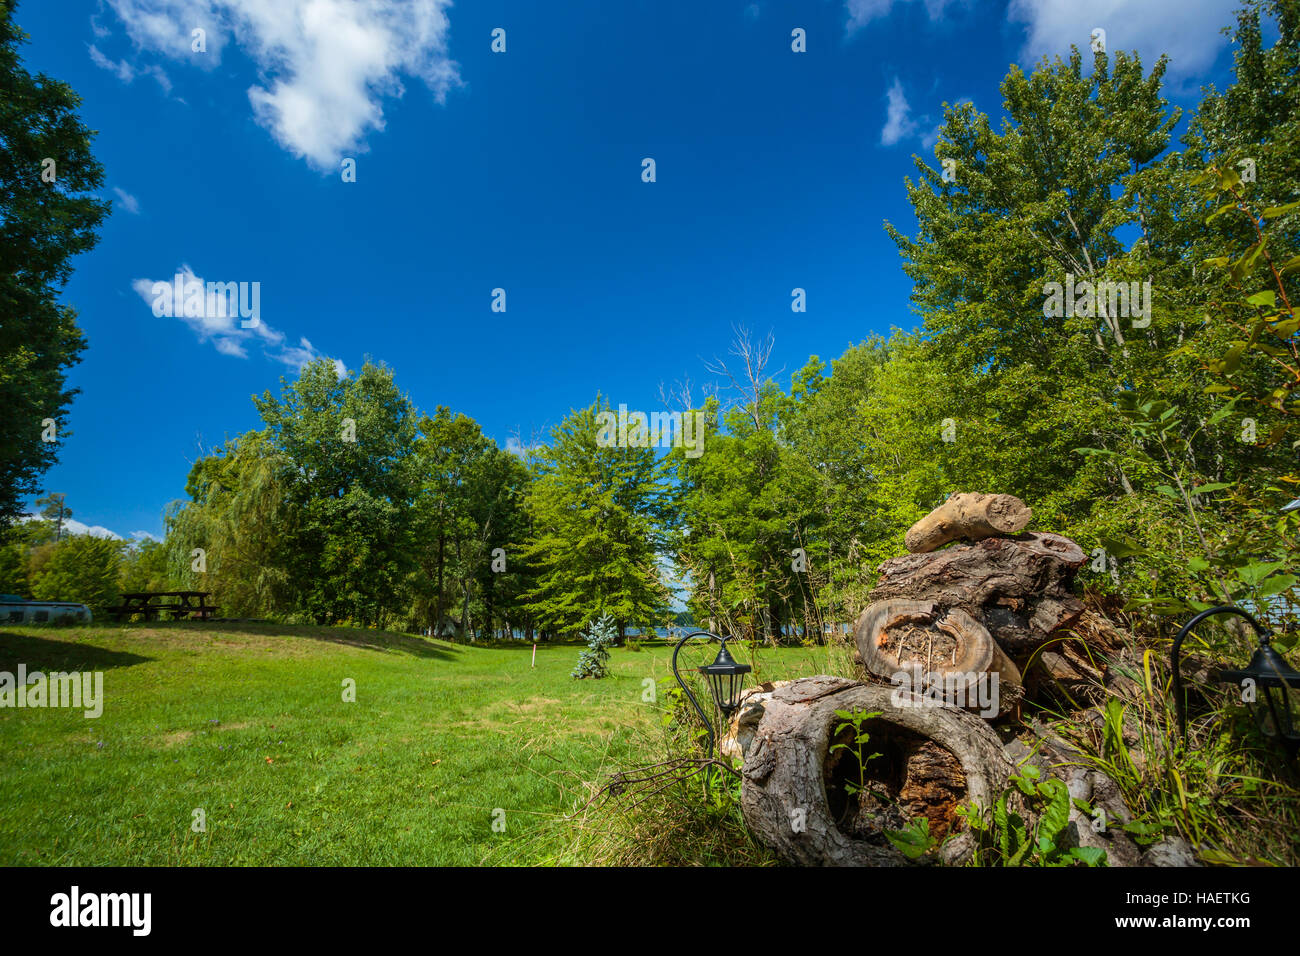 Green lawn with trees in park Stock Photo